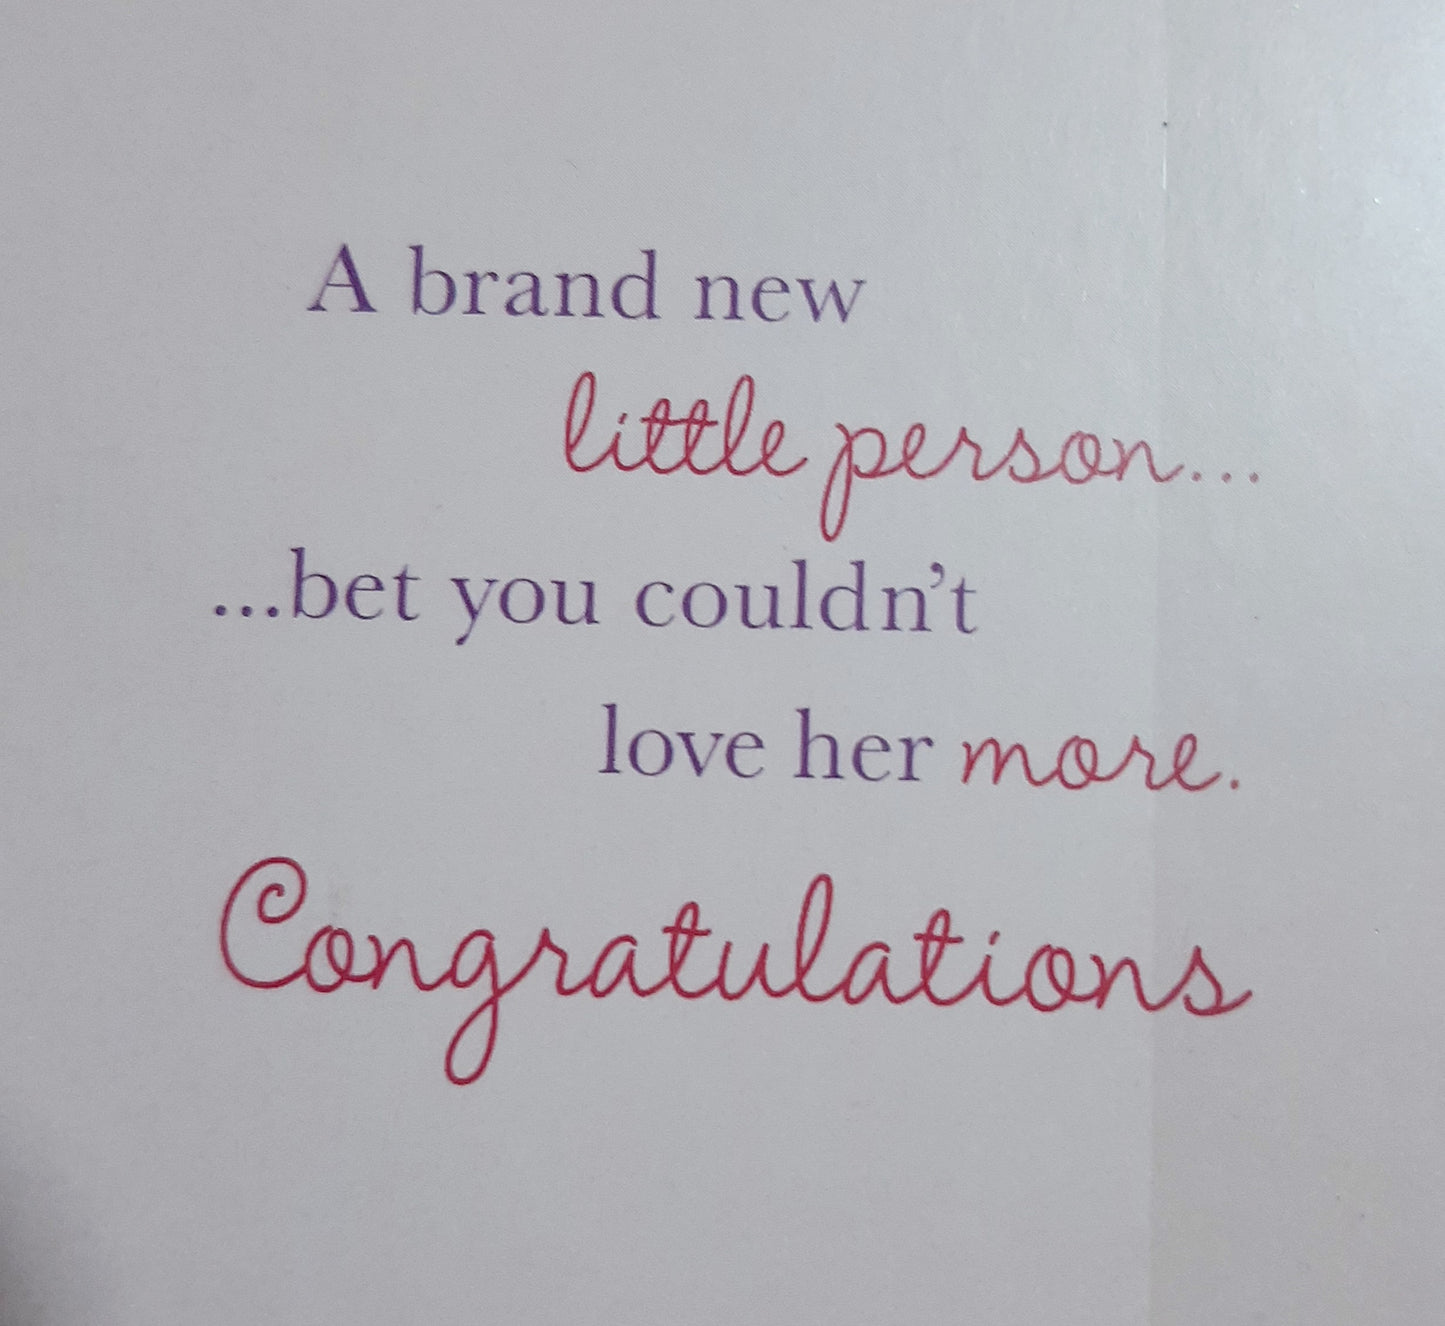 NEW BABY CARD